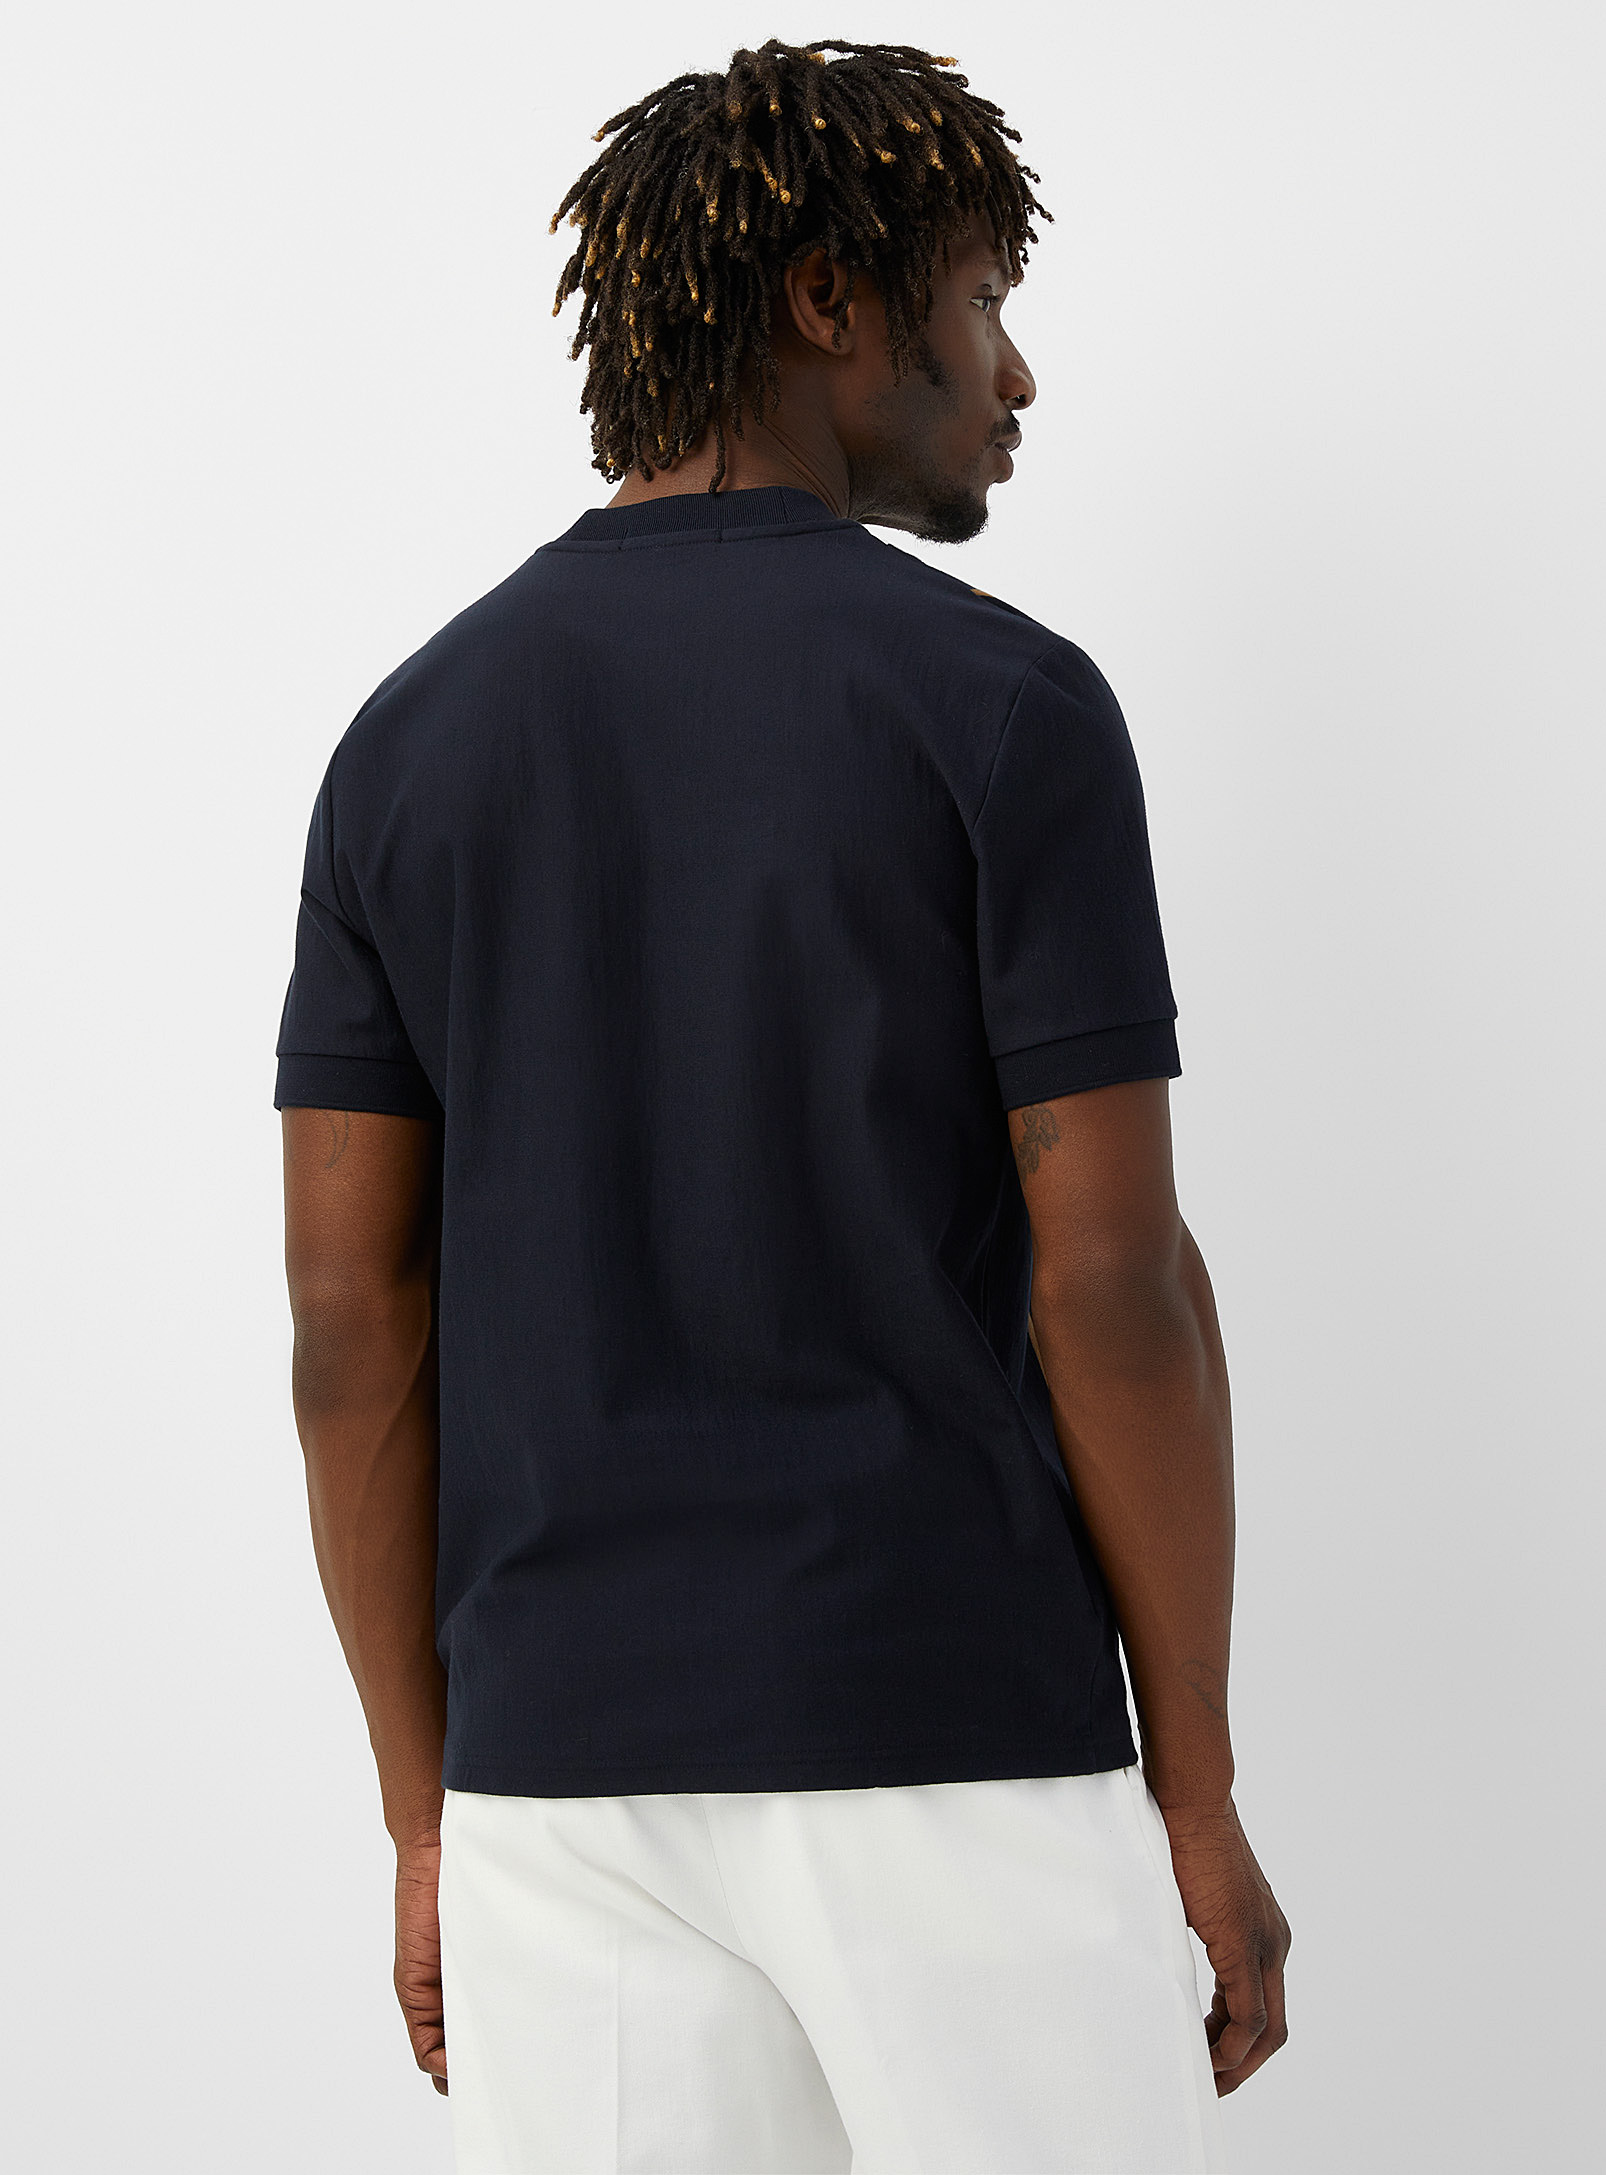 Fred Perry - Le t-shirt rayures verticales